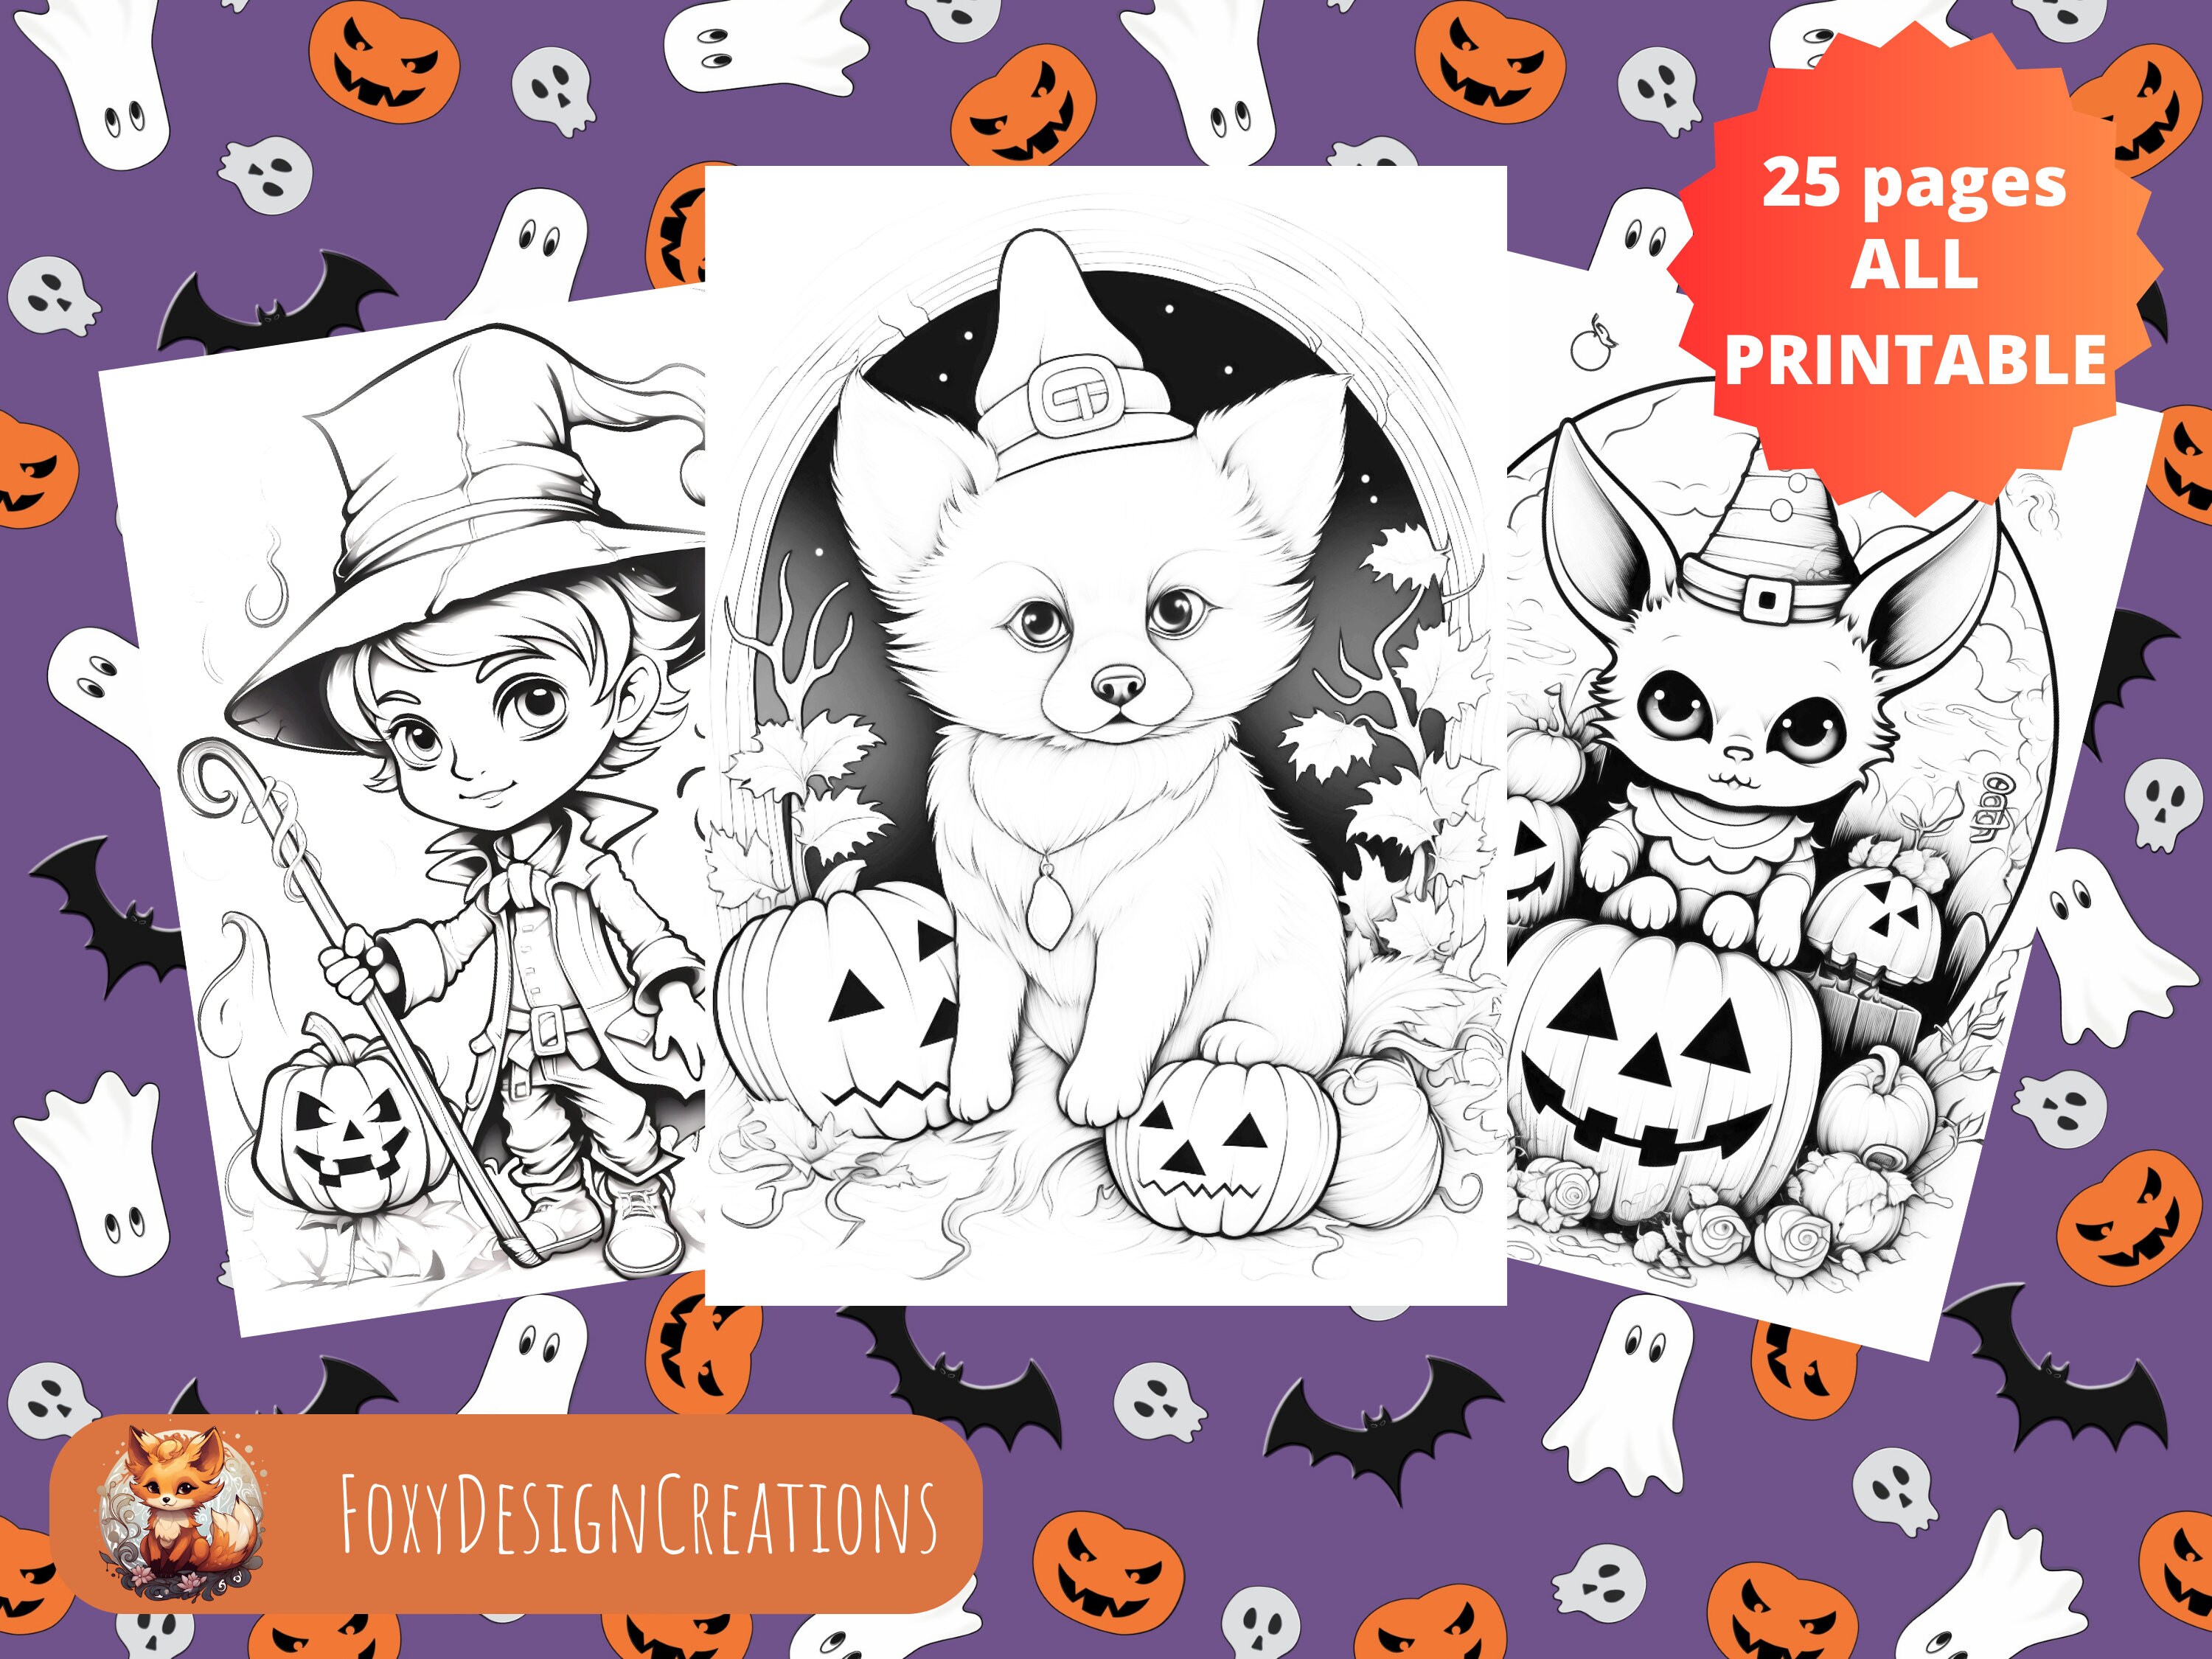 Spooktacular Fun: Cute and Creepy Halloween Coloring Pages - Etsy